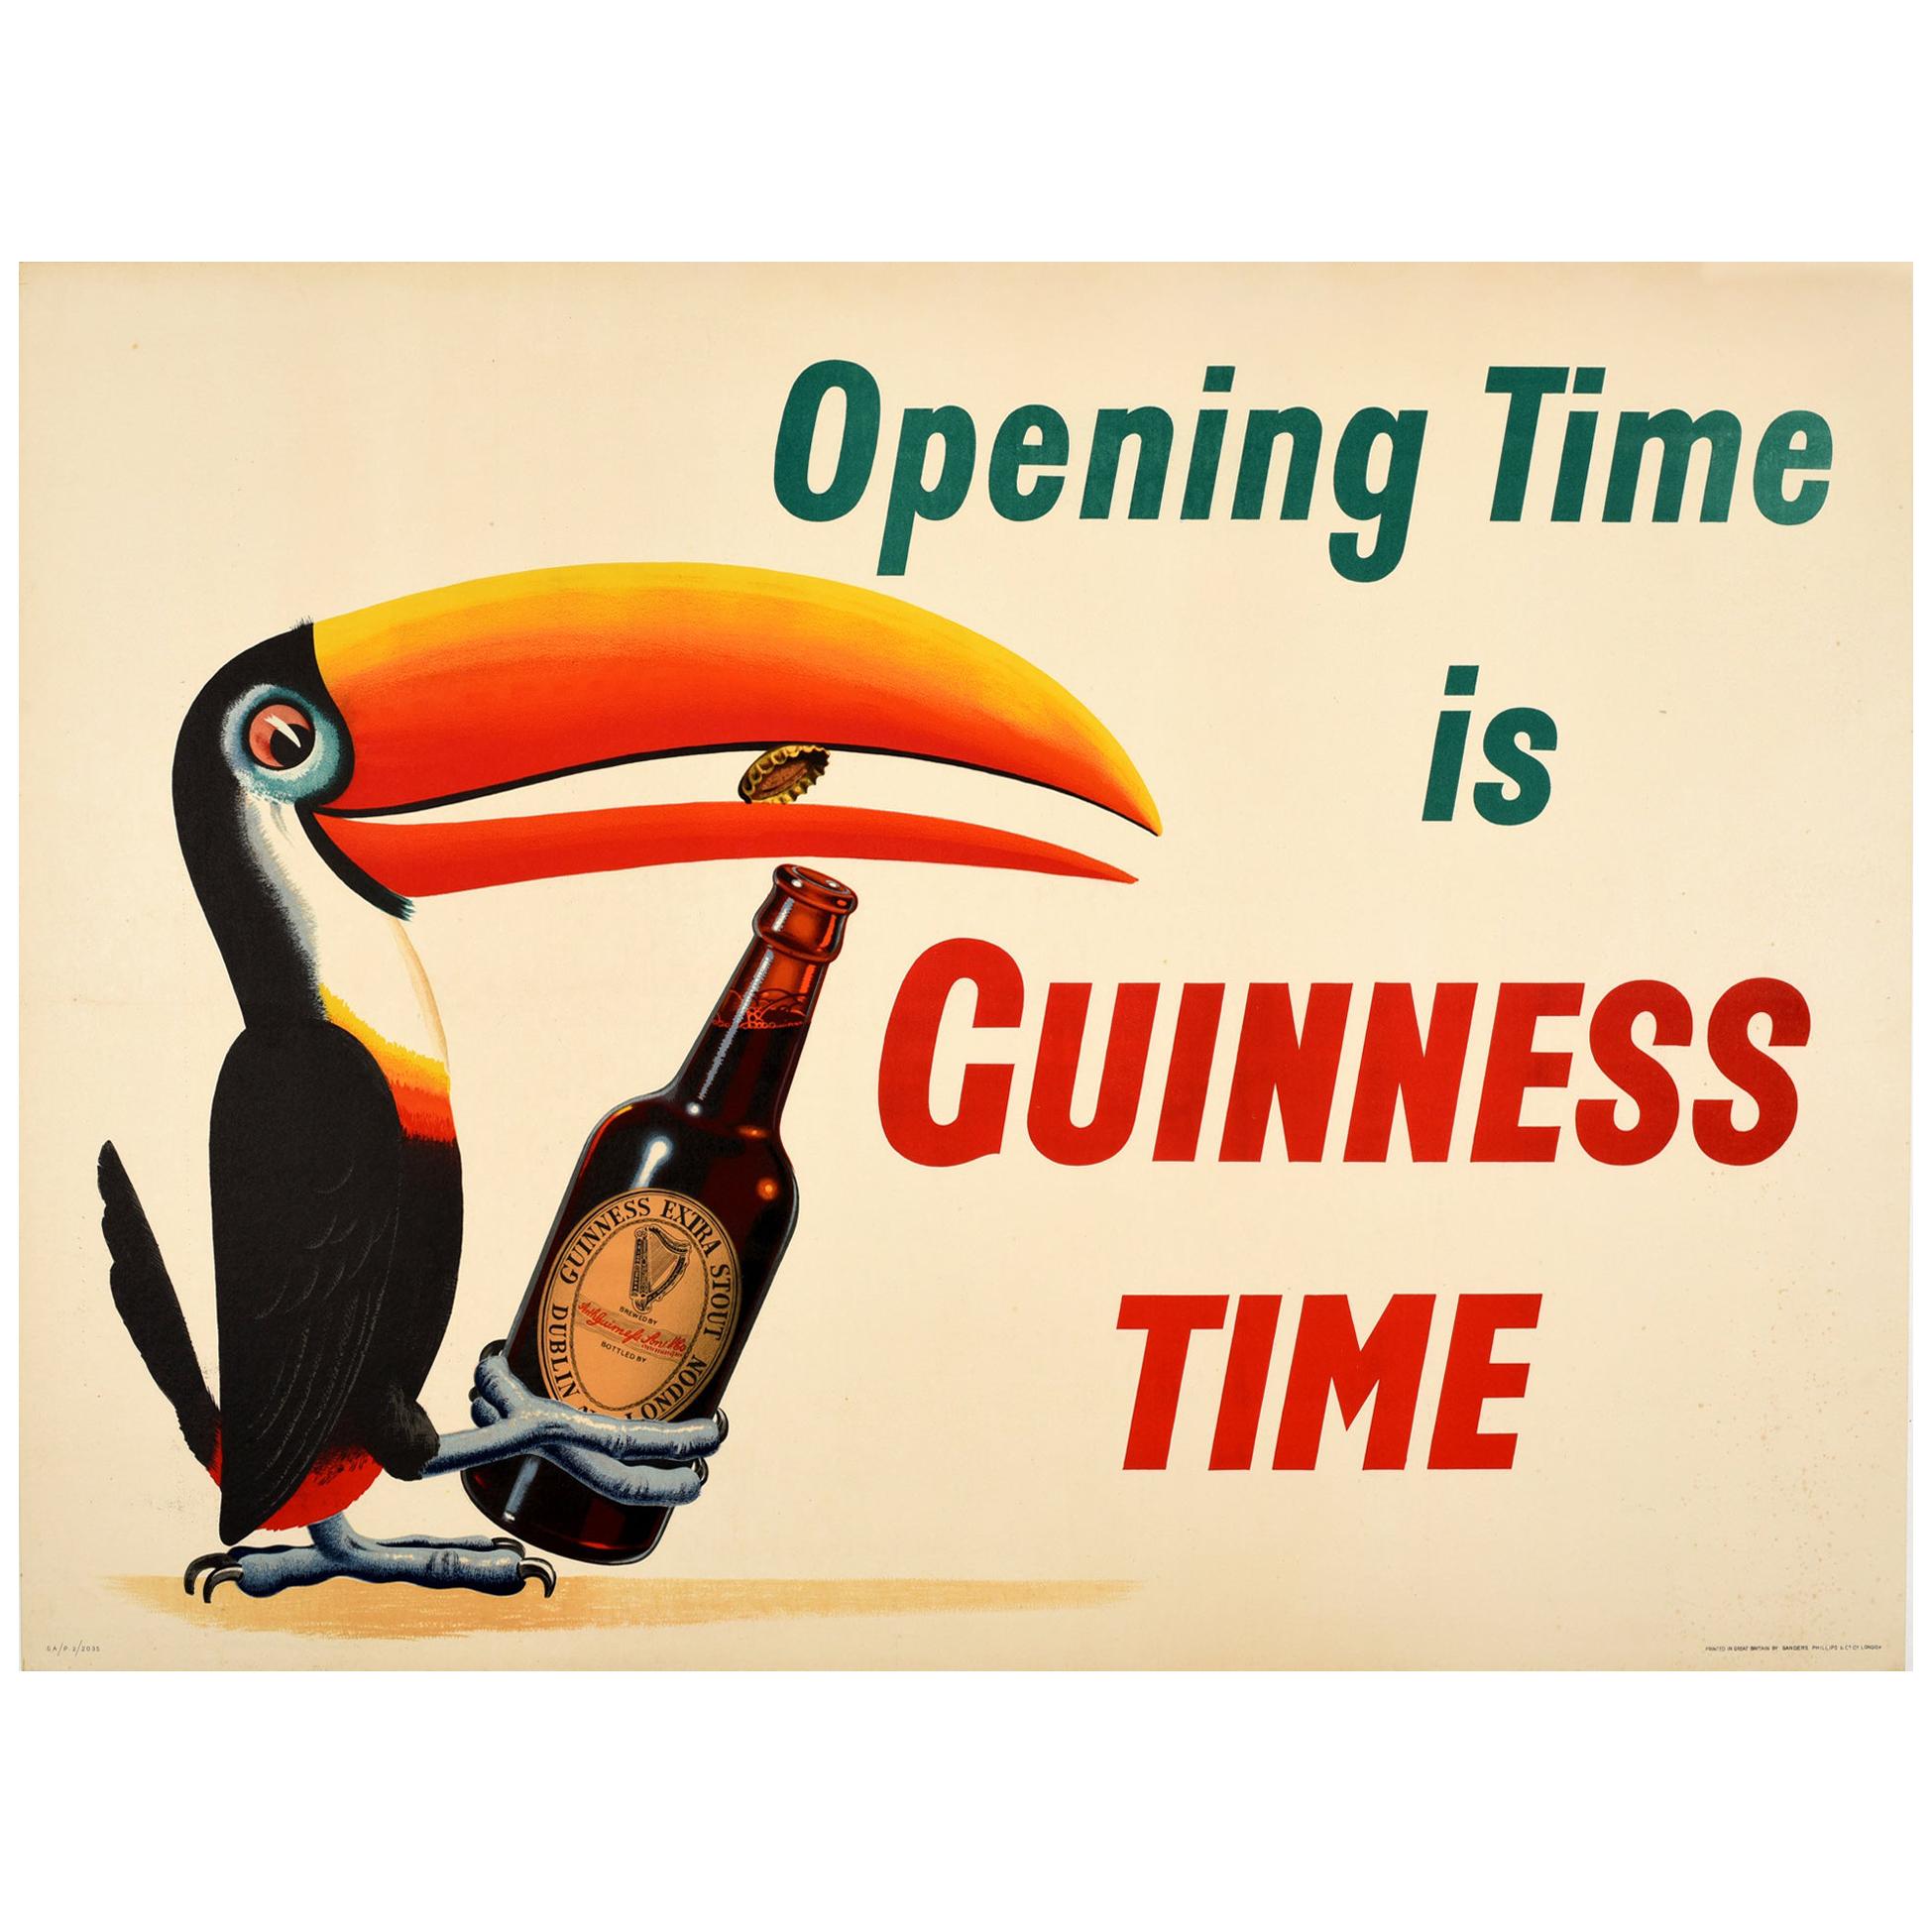 Original Vintage Getränke-Poster „Opening Time Is Guinness Time“ Ikonisches Toucan-Design